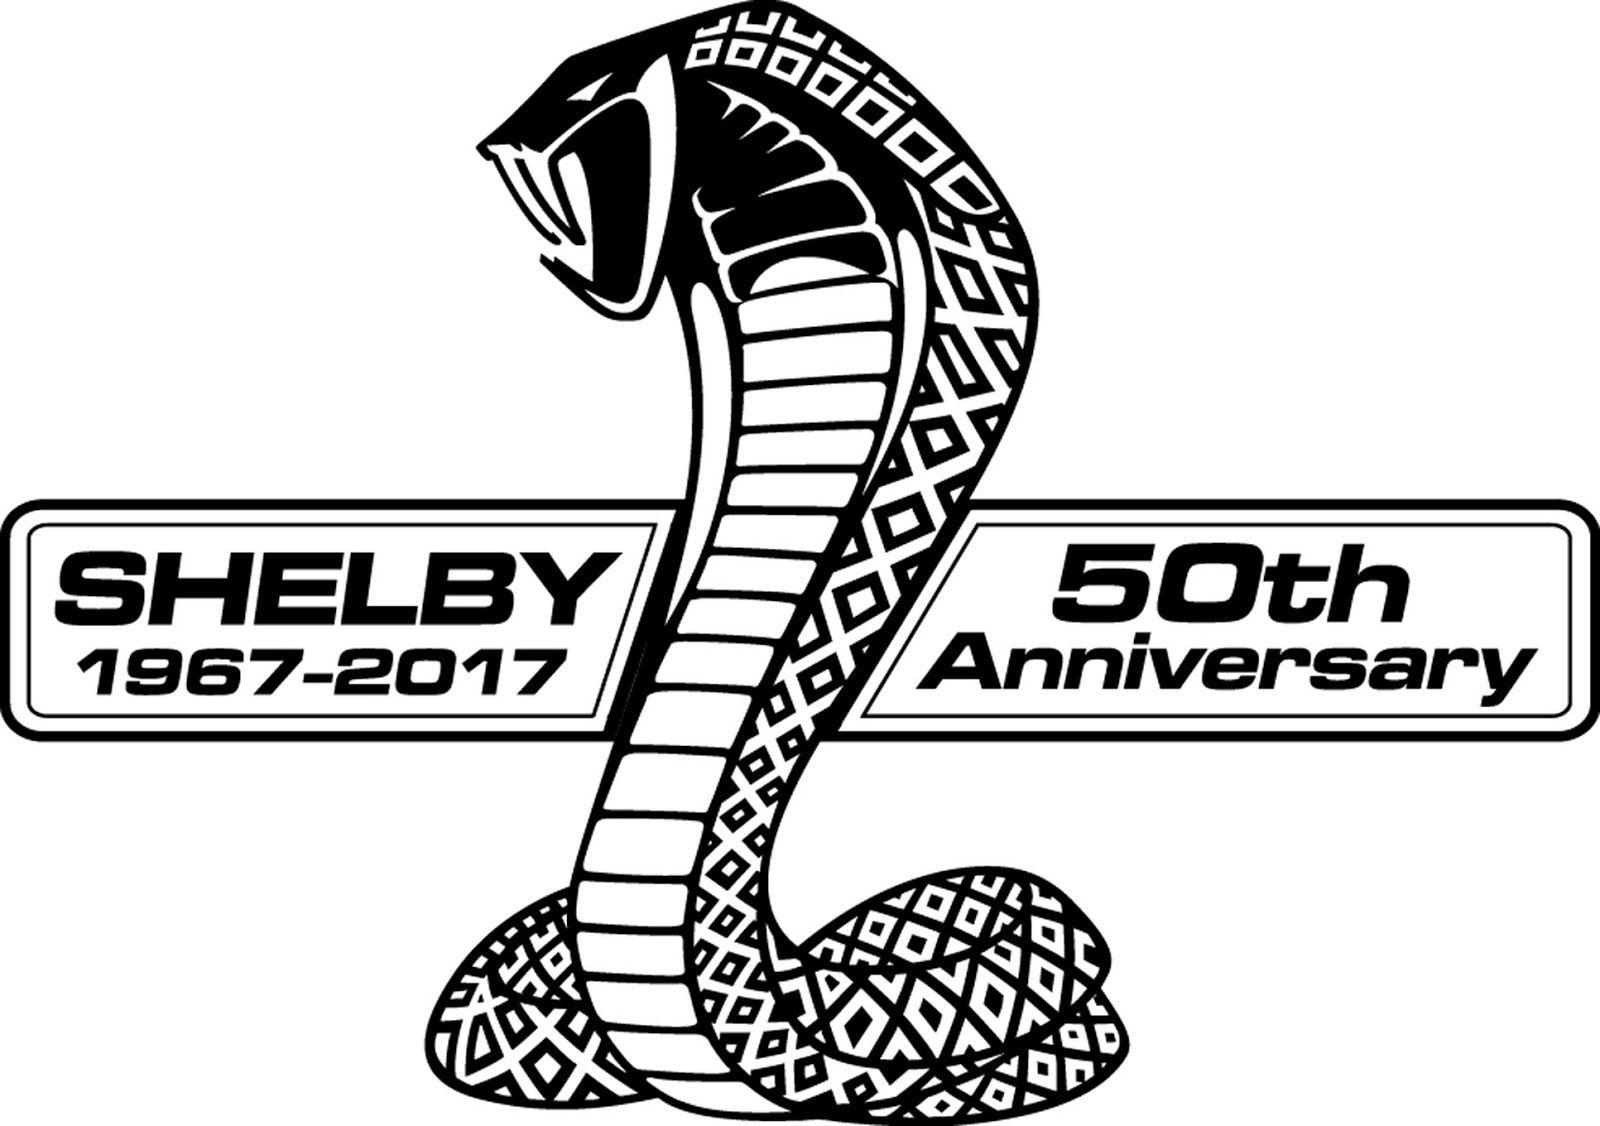 Shelby Logo, HD, Png and Vector Photo Download ⚓ 2018 ⚓ Car